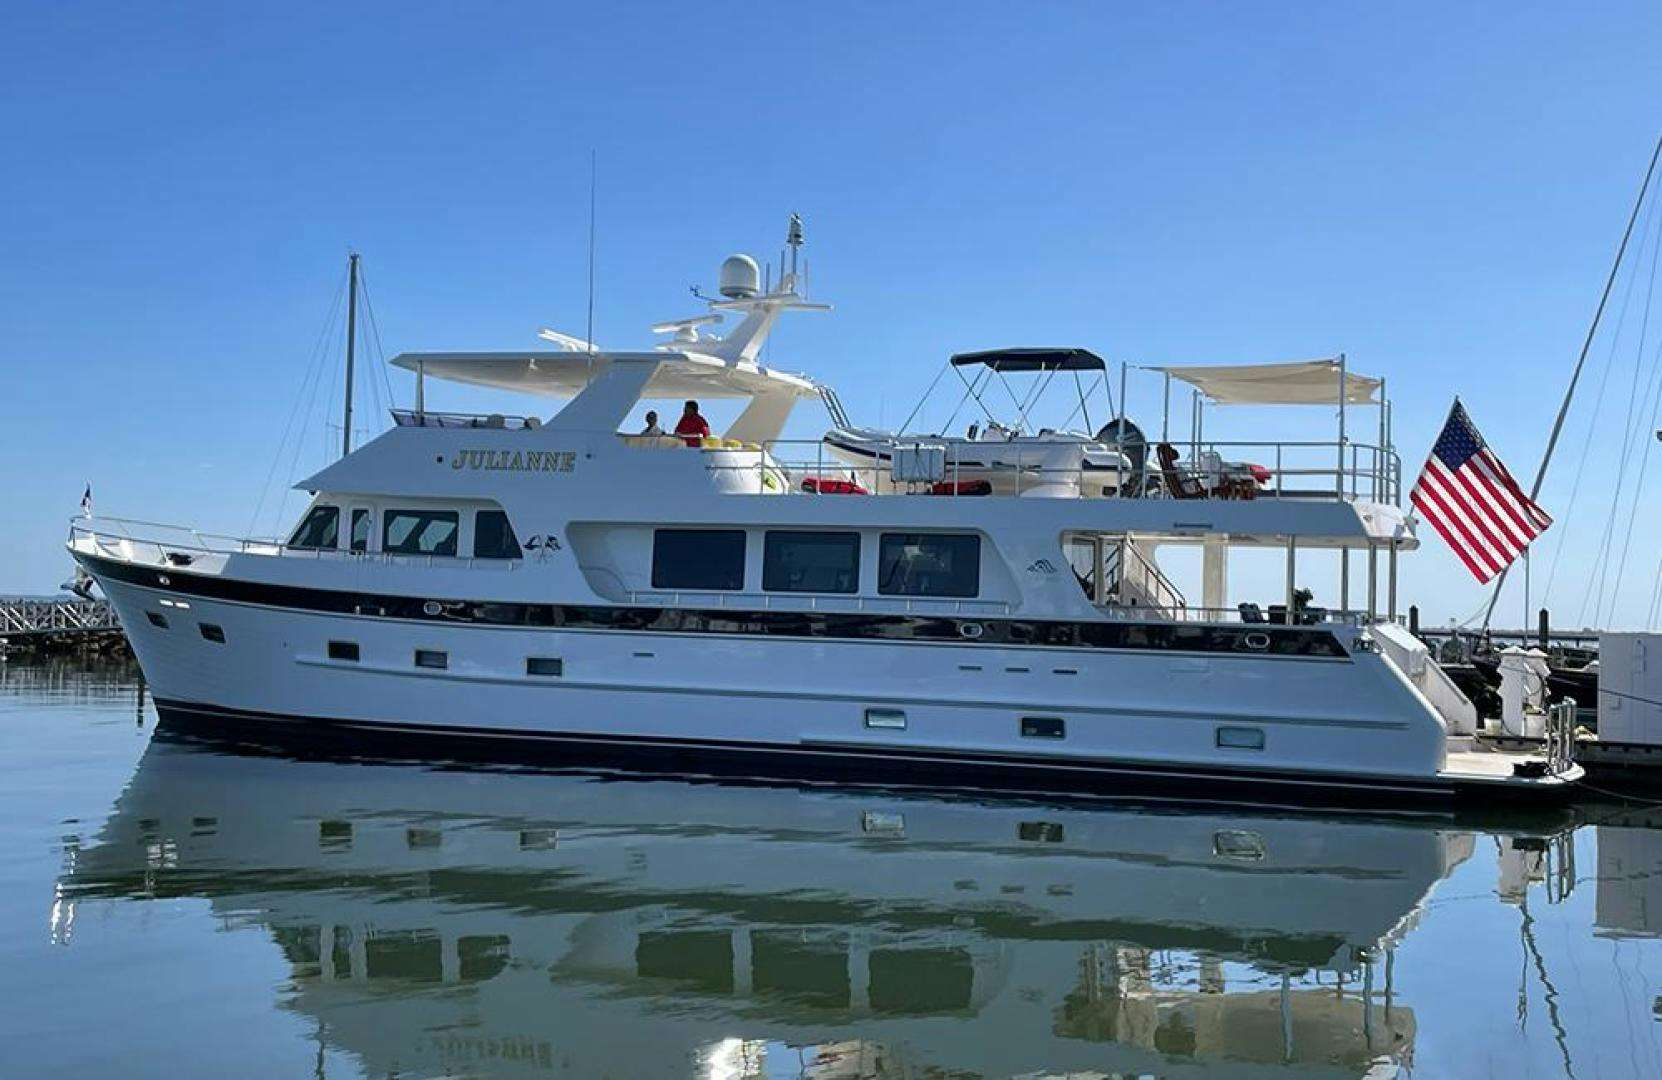 Julianne name reserved
Yacht for Sale